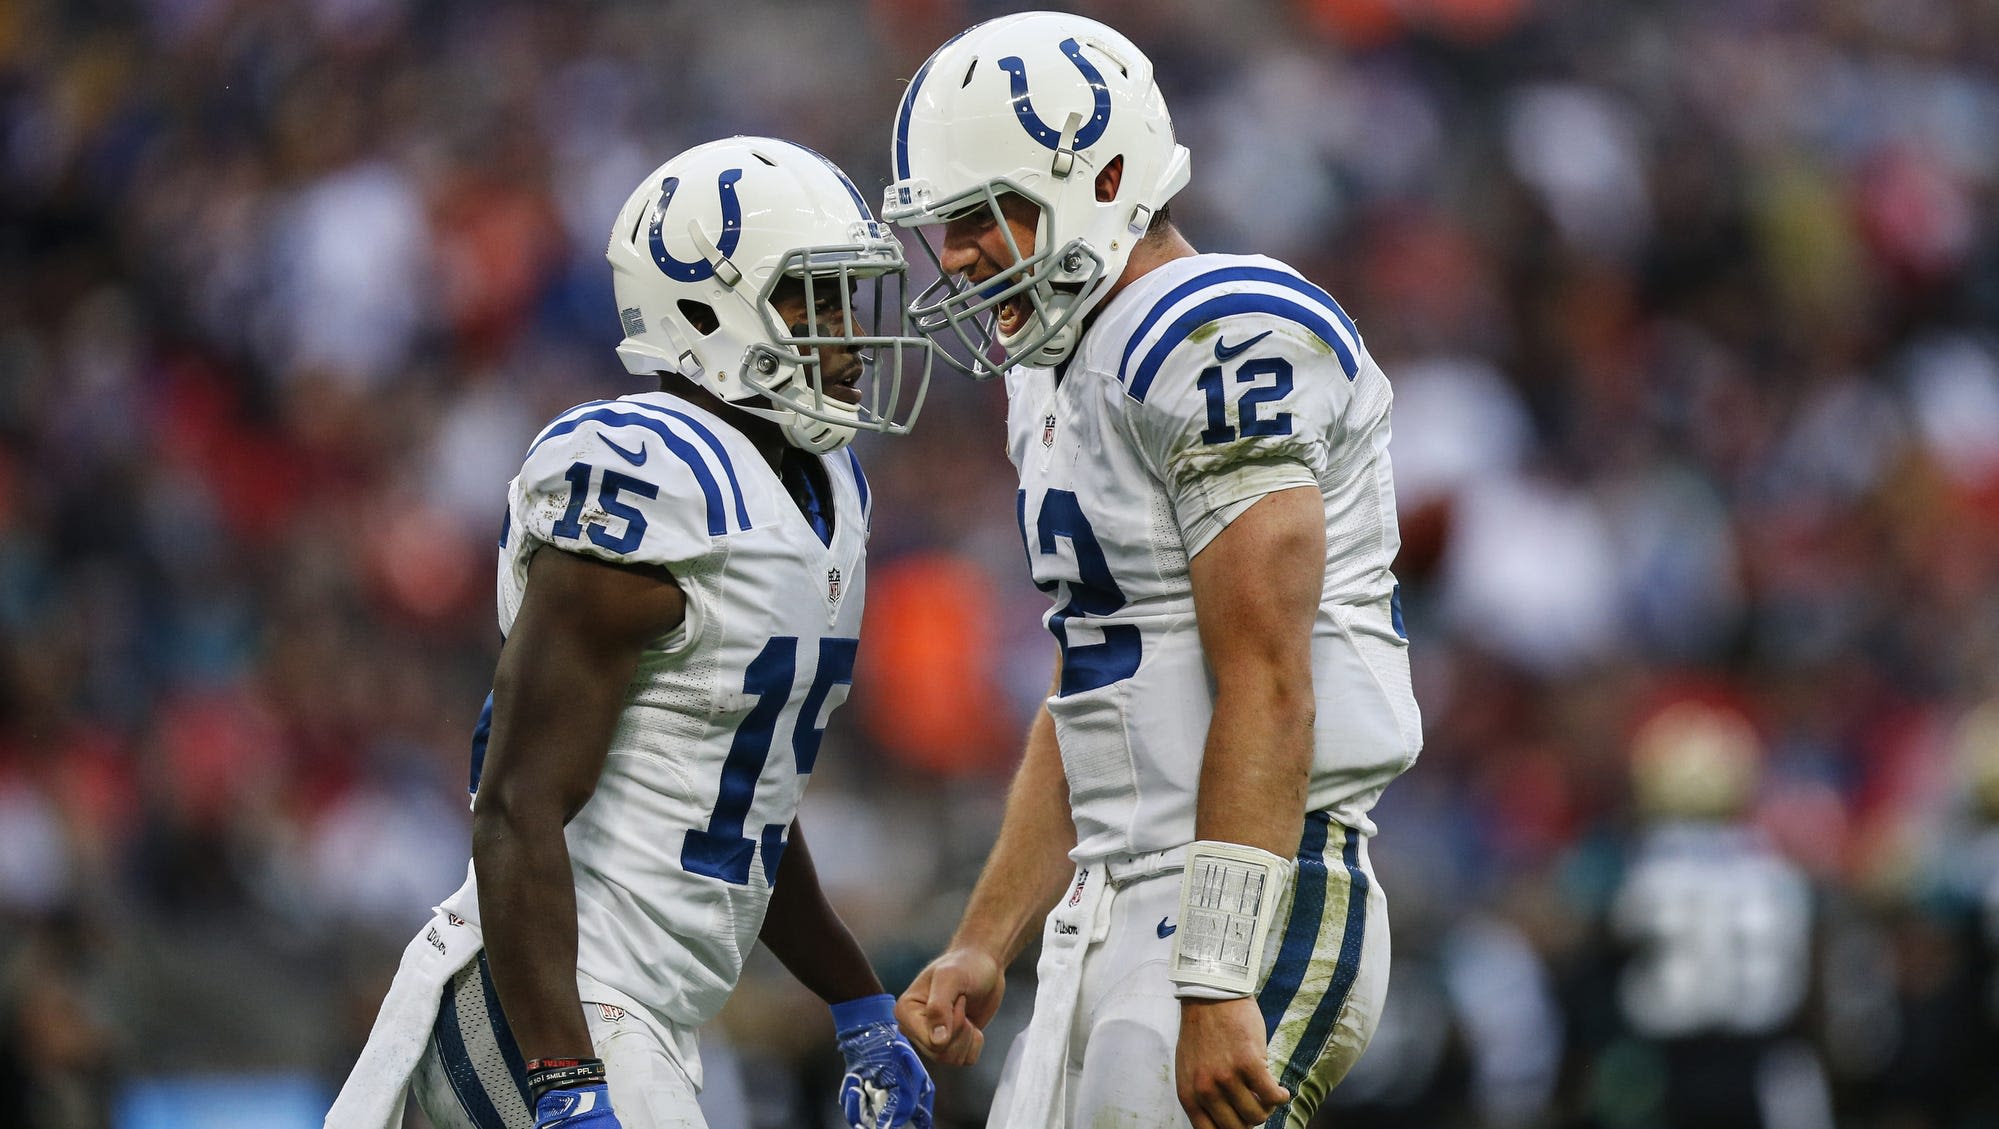 Andrew Luck had more talent than Tom Brady, says former teammate of both, Phillip Dorsett